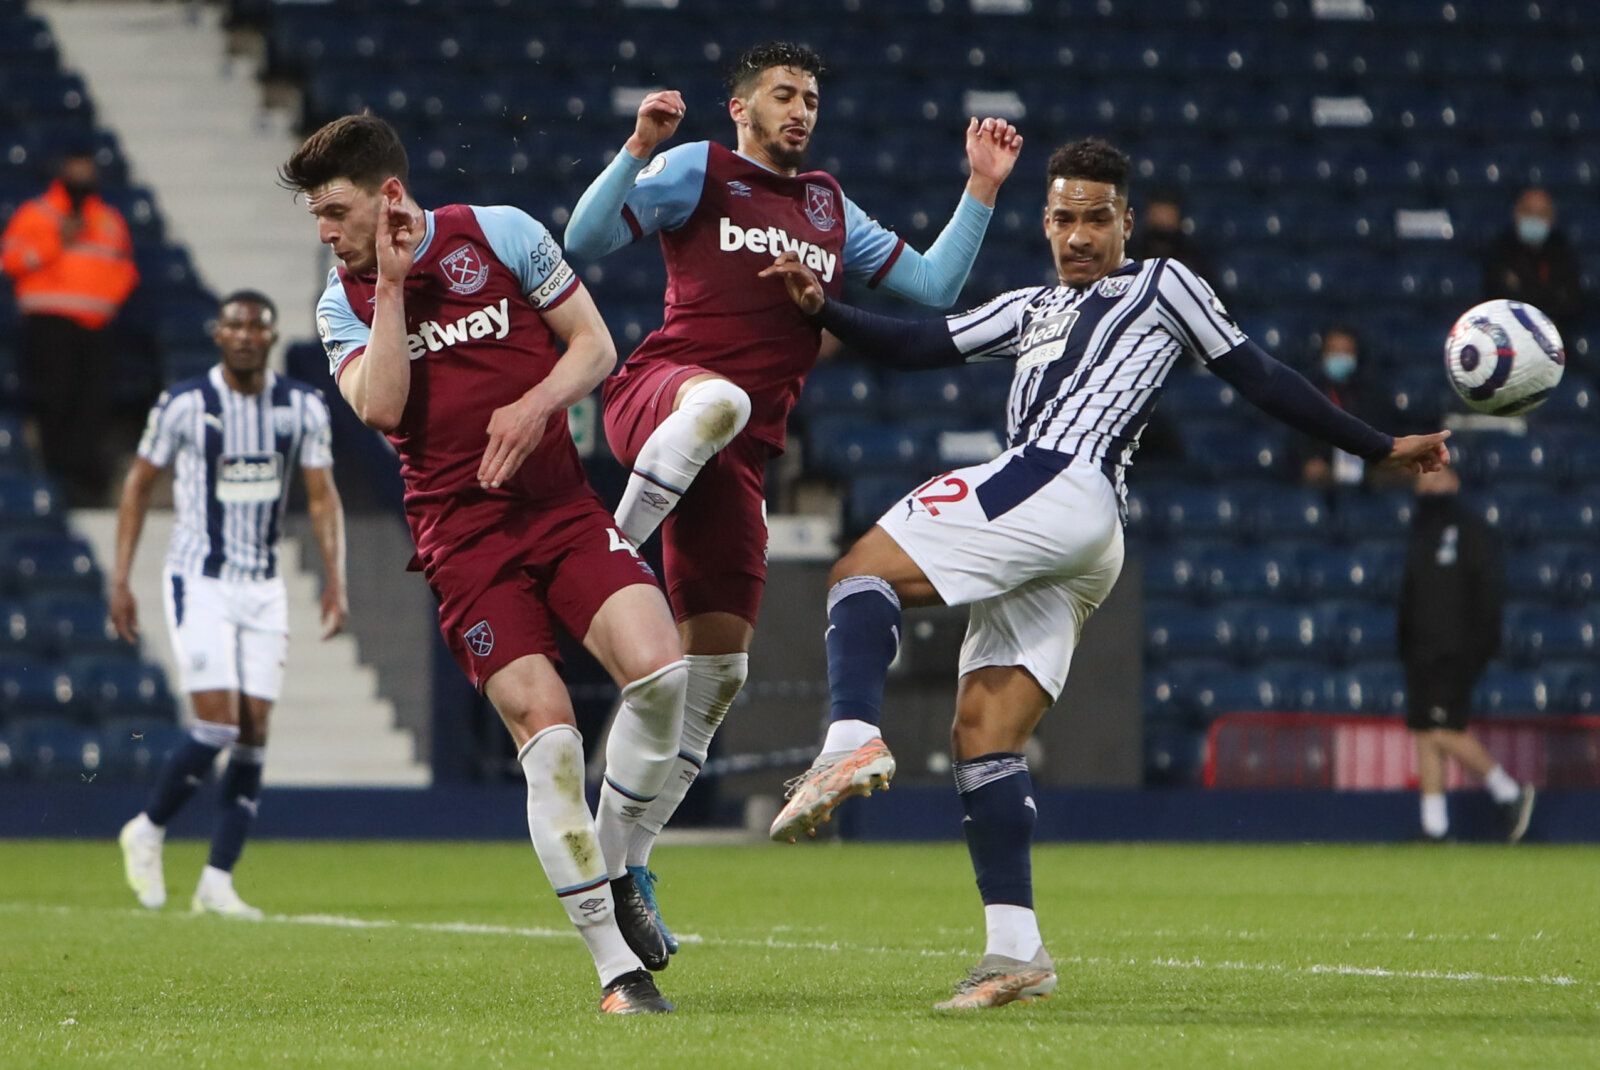 Soccer Football - Premier League - West Bromwich Albion v West Ham United - The Hawthorns, West Bromwich, Britain - May 19, 2021 West Bromwich Albion's Matheus Pereira in action with West Ham United's Pablo Fornals and Declan Rice Pool via REUTERS/Geoff Caddick EDITORIAL USE ONLY. No use with unauthorized audio, video, data, fixture lists, club/league logos or 'live' services. Online in-match use limited to 75 images, no video emulation. No use in betting, games or single club /league/player pub